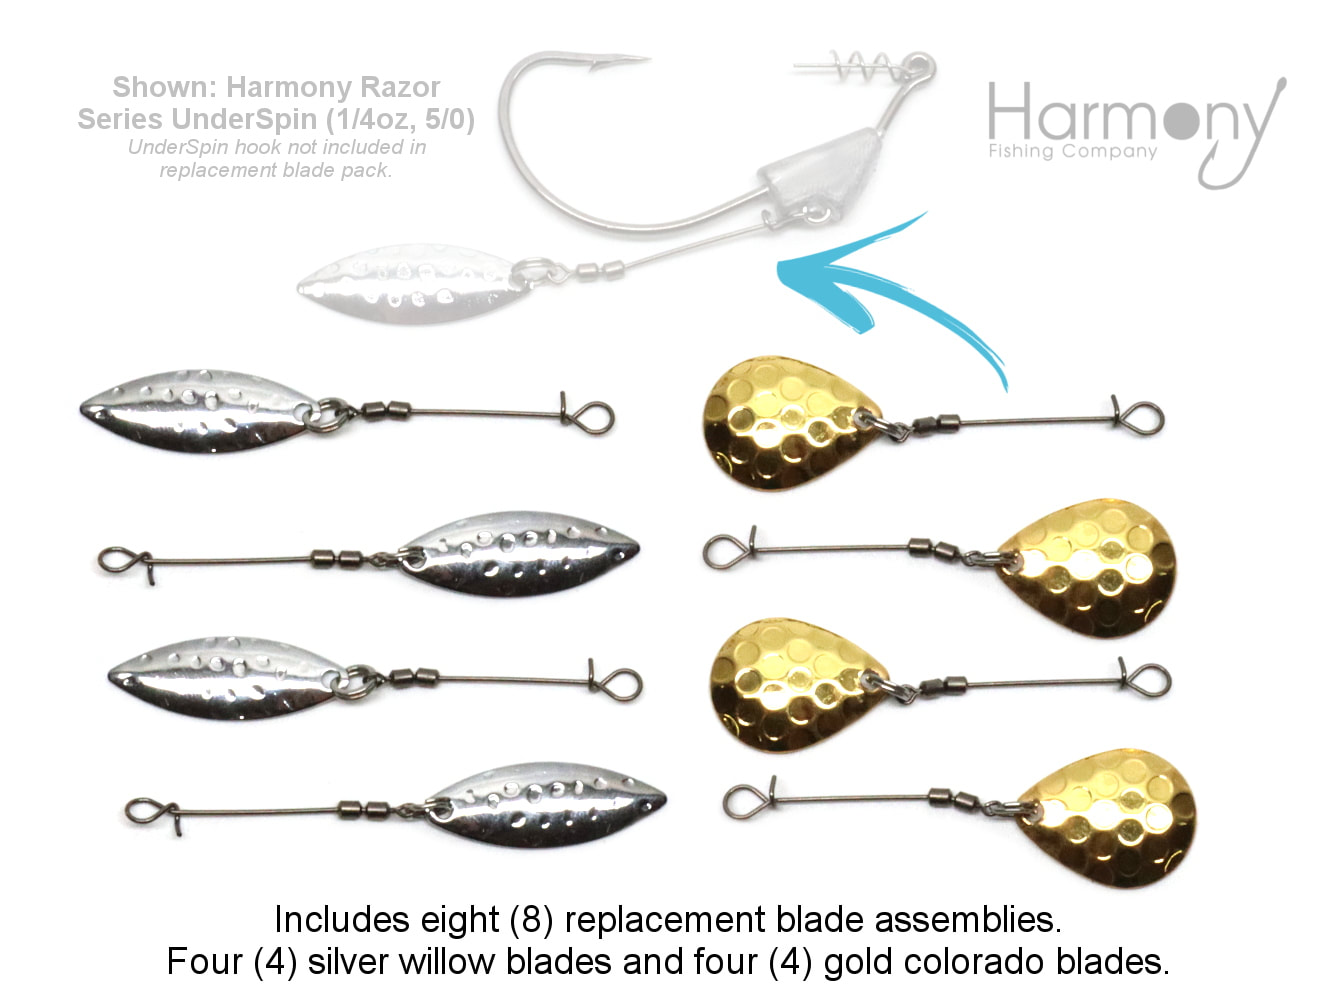 Harmony Fishing – Replacement blade assemblies for Razor Series UnderSpins  (8 blade, swivel, wire assemblies – 4 silver willow, 4 gold colorado)